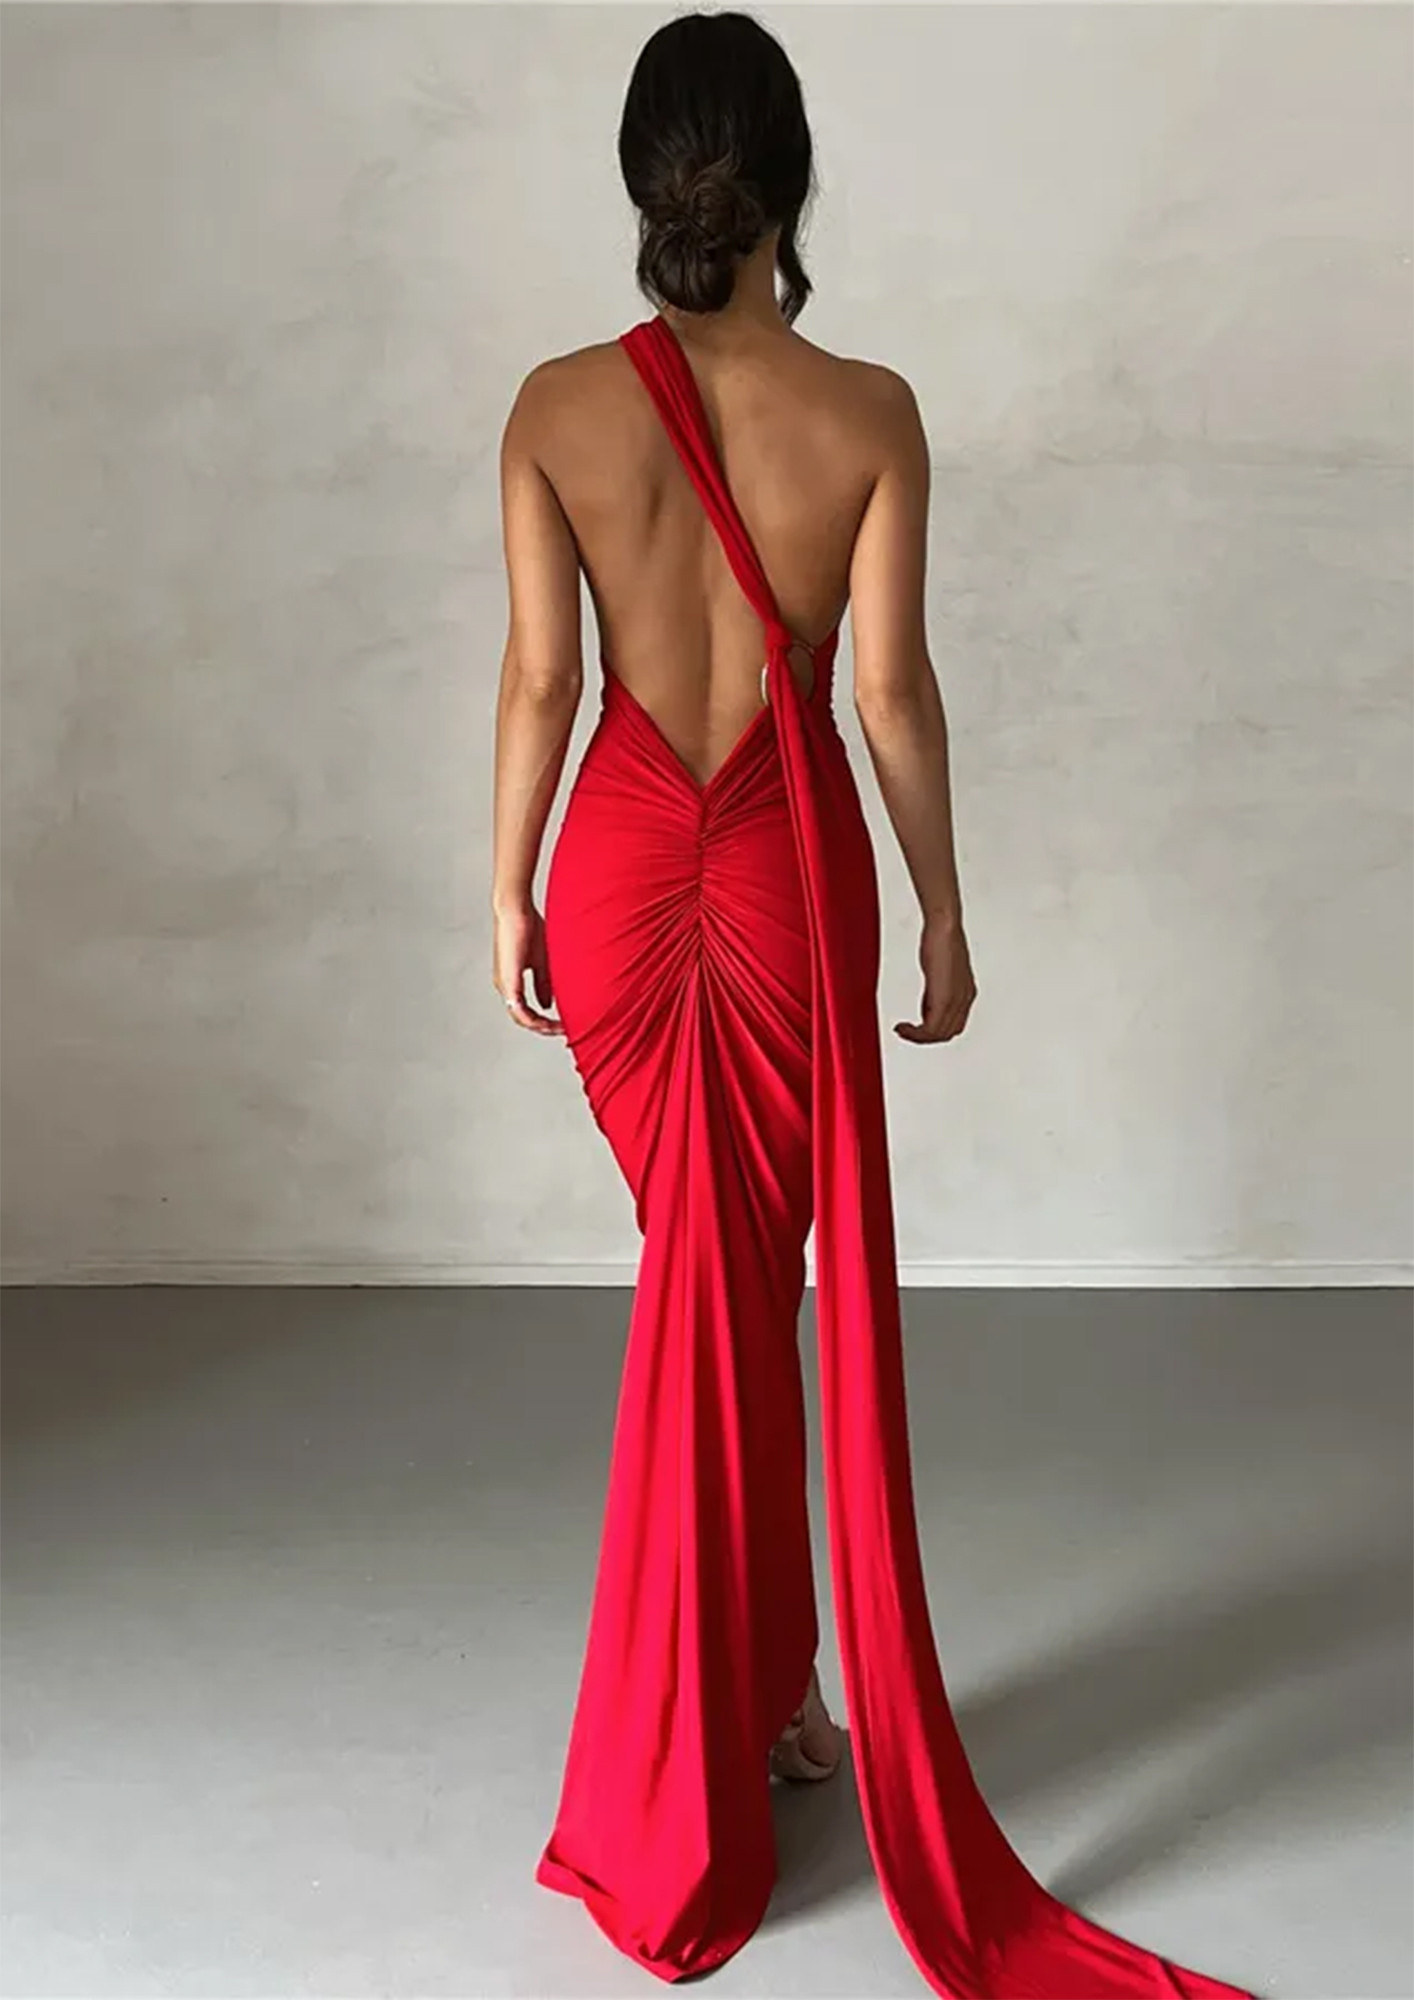 Backless Wedding Dresses - Open & Low Back Gowns